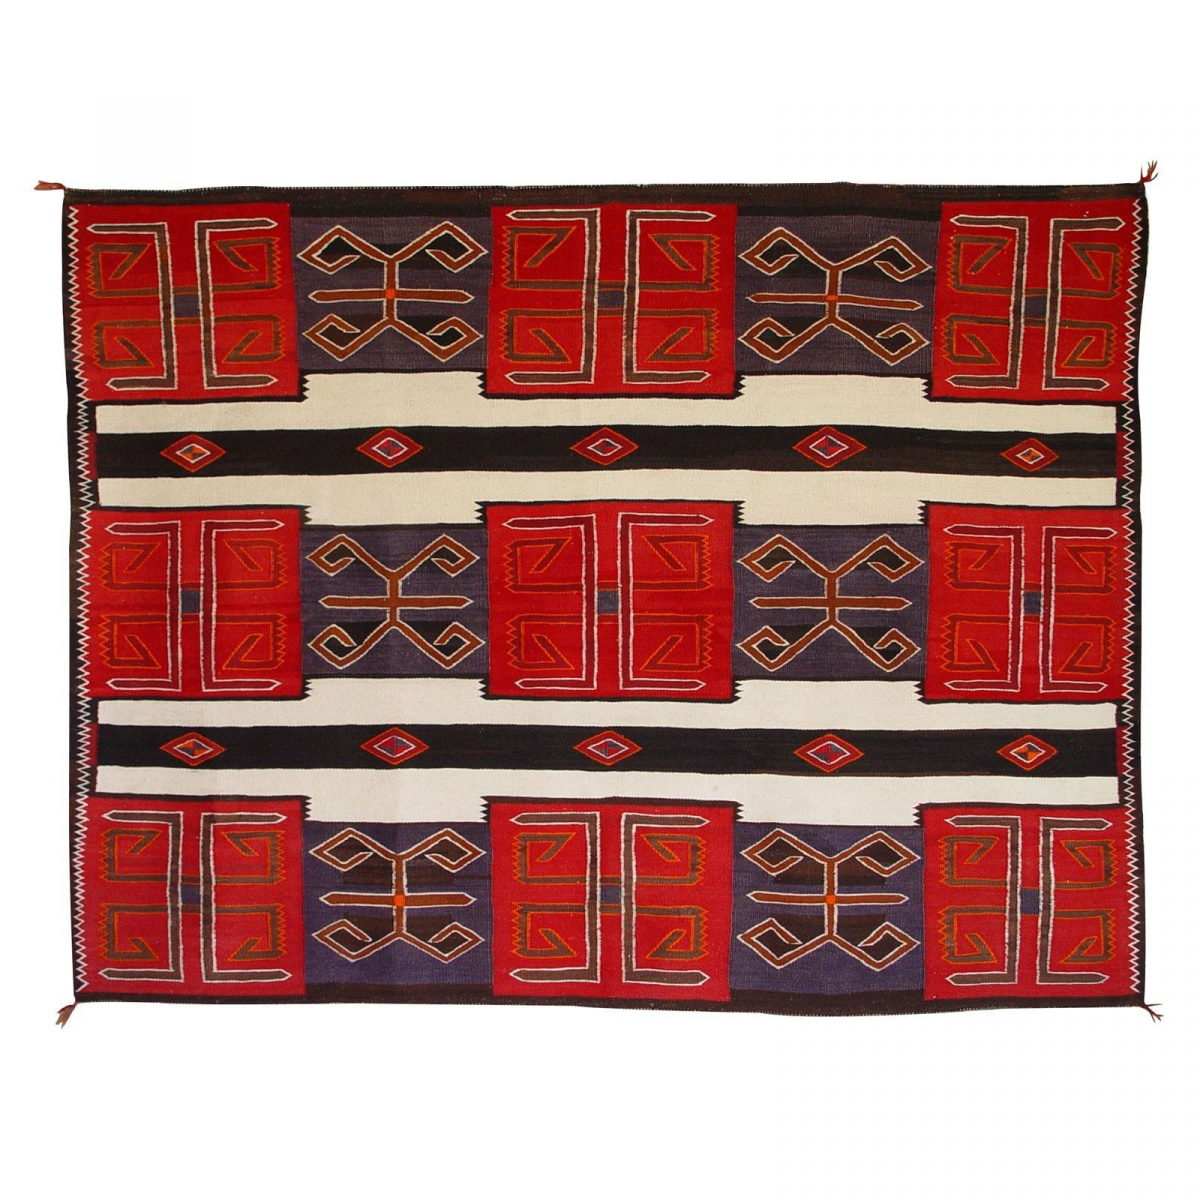 3rd Phase Chief Blanket : Historic : GHT 2126 : Circa 1920-1930's